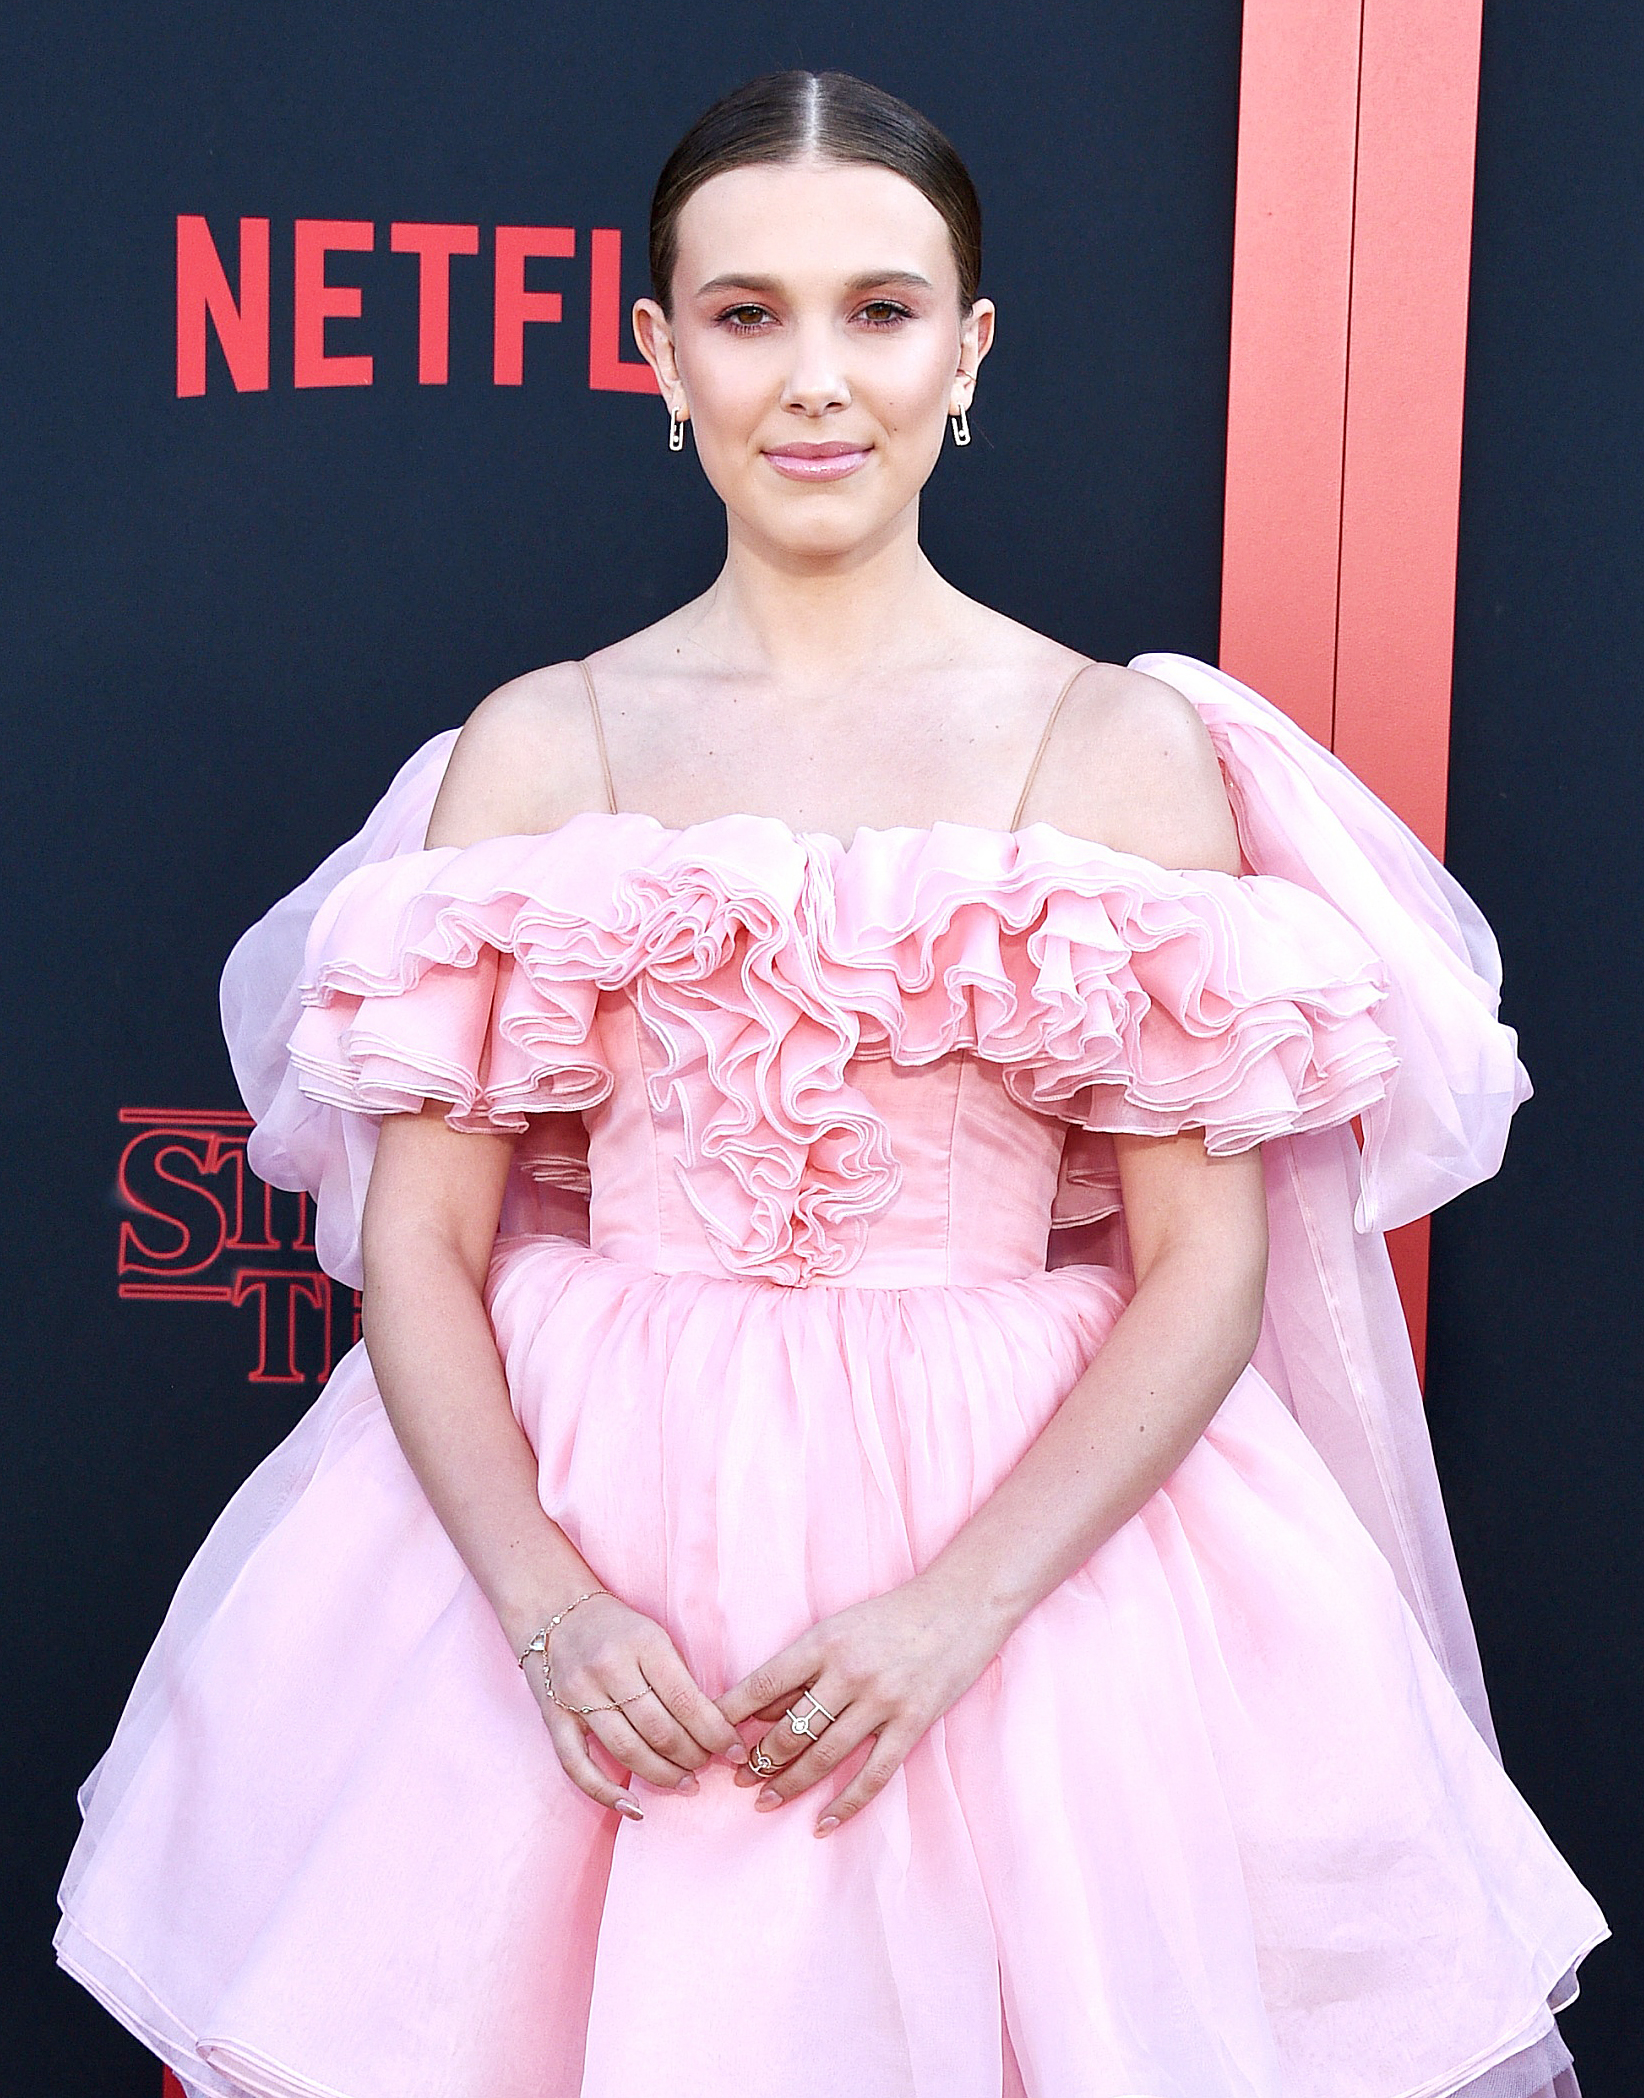 Did you know Stranger Things star, Millie Bobby Brown has a clean